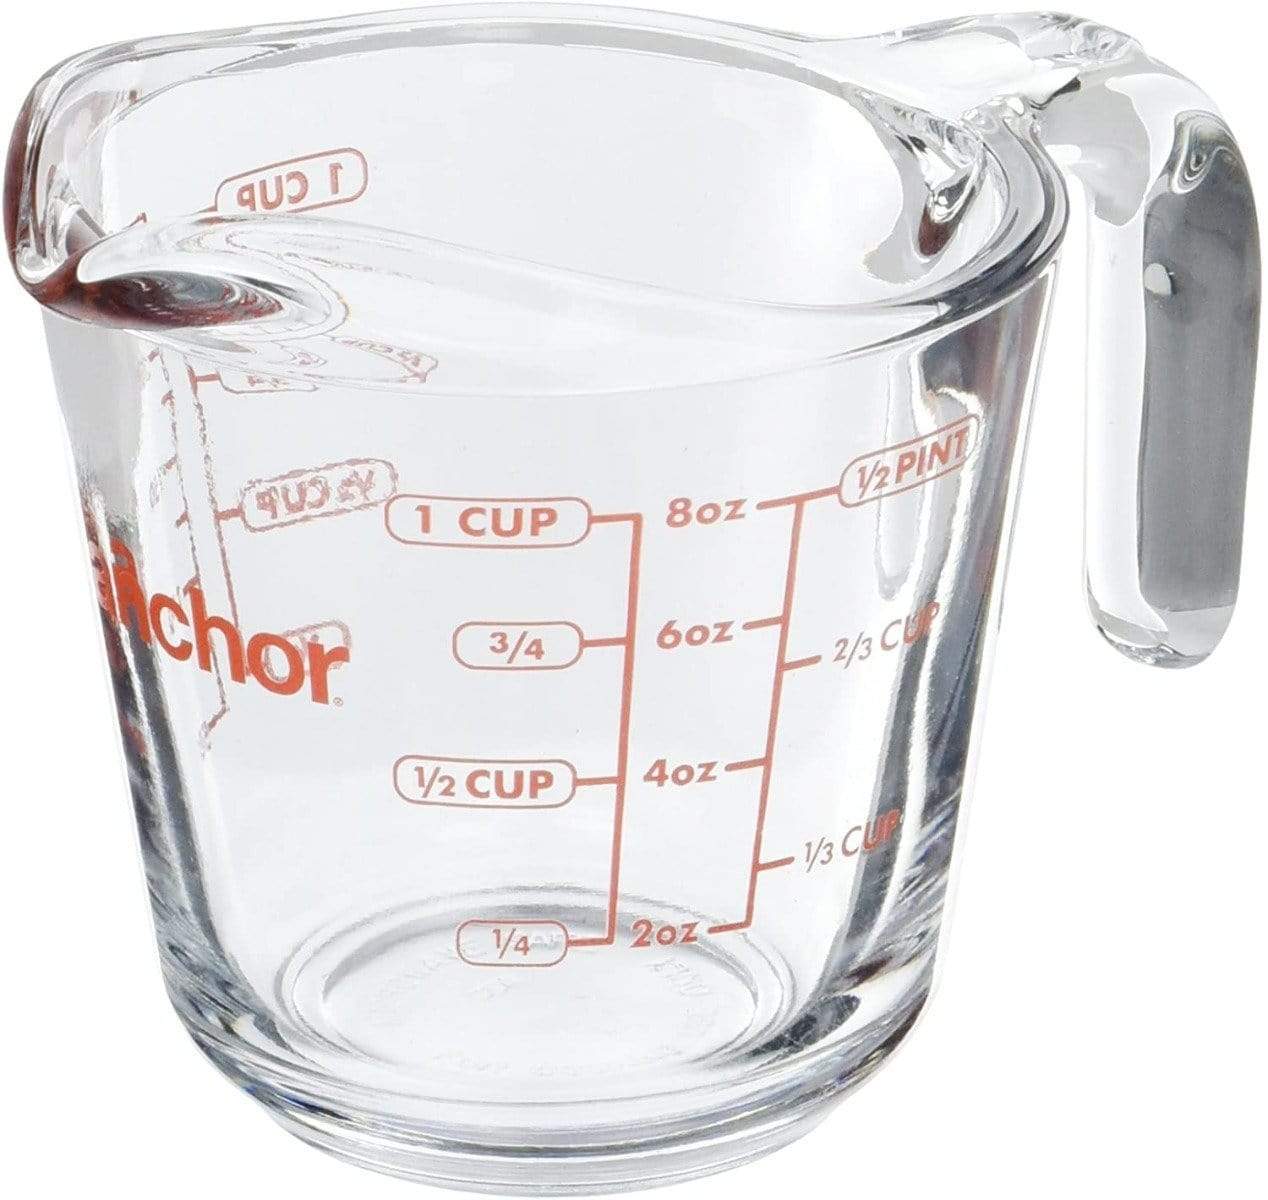 https://cdn.shopify.com/s/files/1/0473/5398/7229/products/anchor-hocking-anchor-hocking-red-8oz-measuring-cup-076440551754-19593226322080_1600x.jpg?v=1626103882